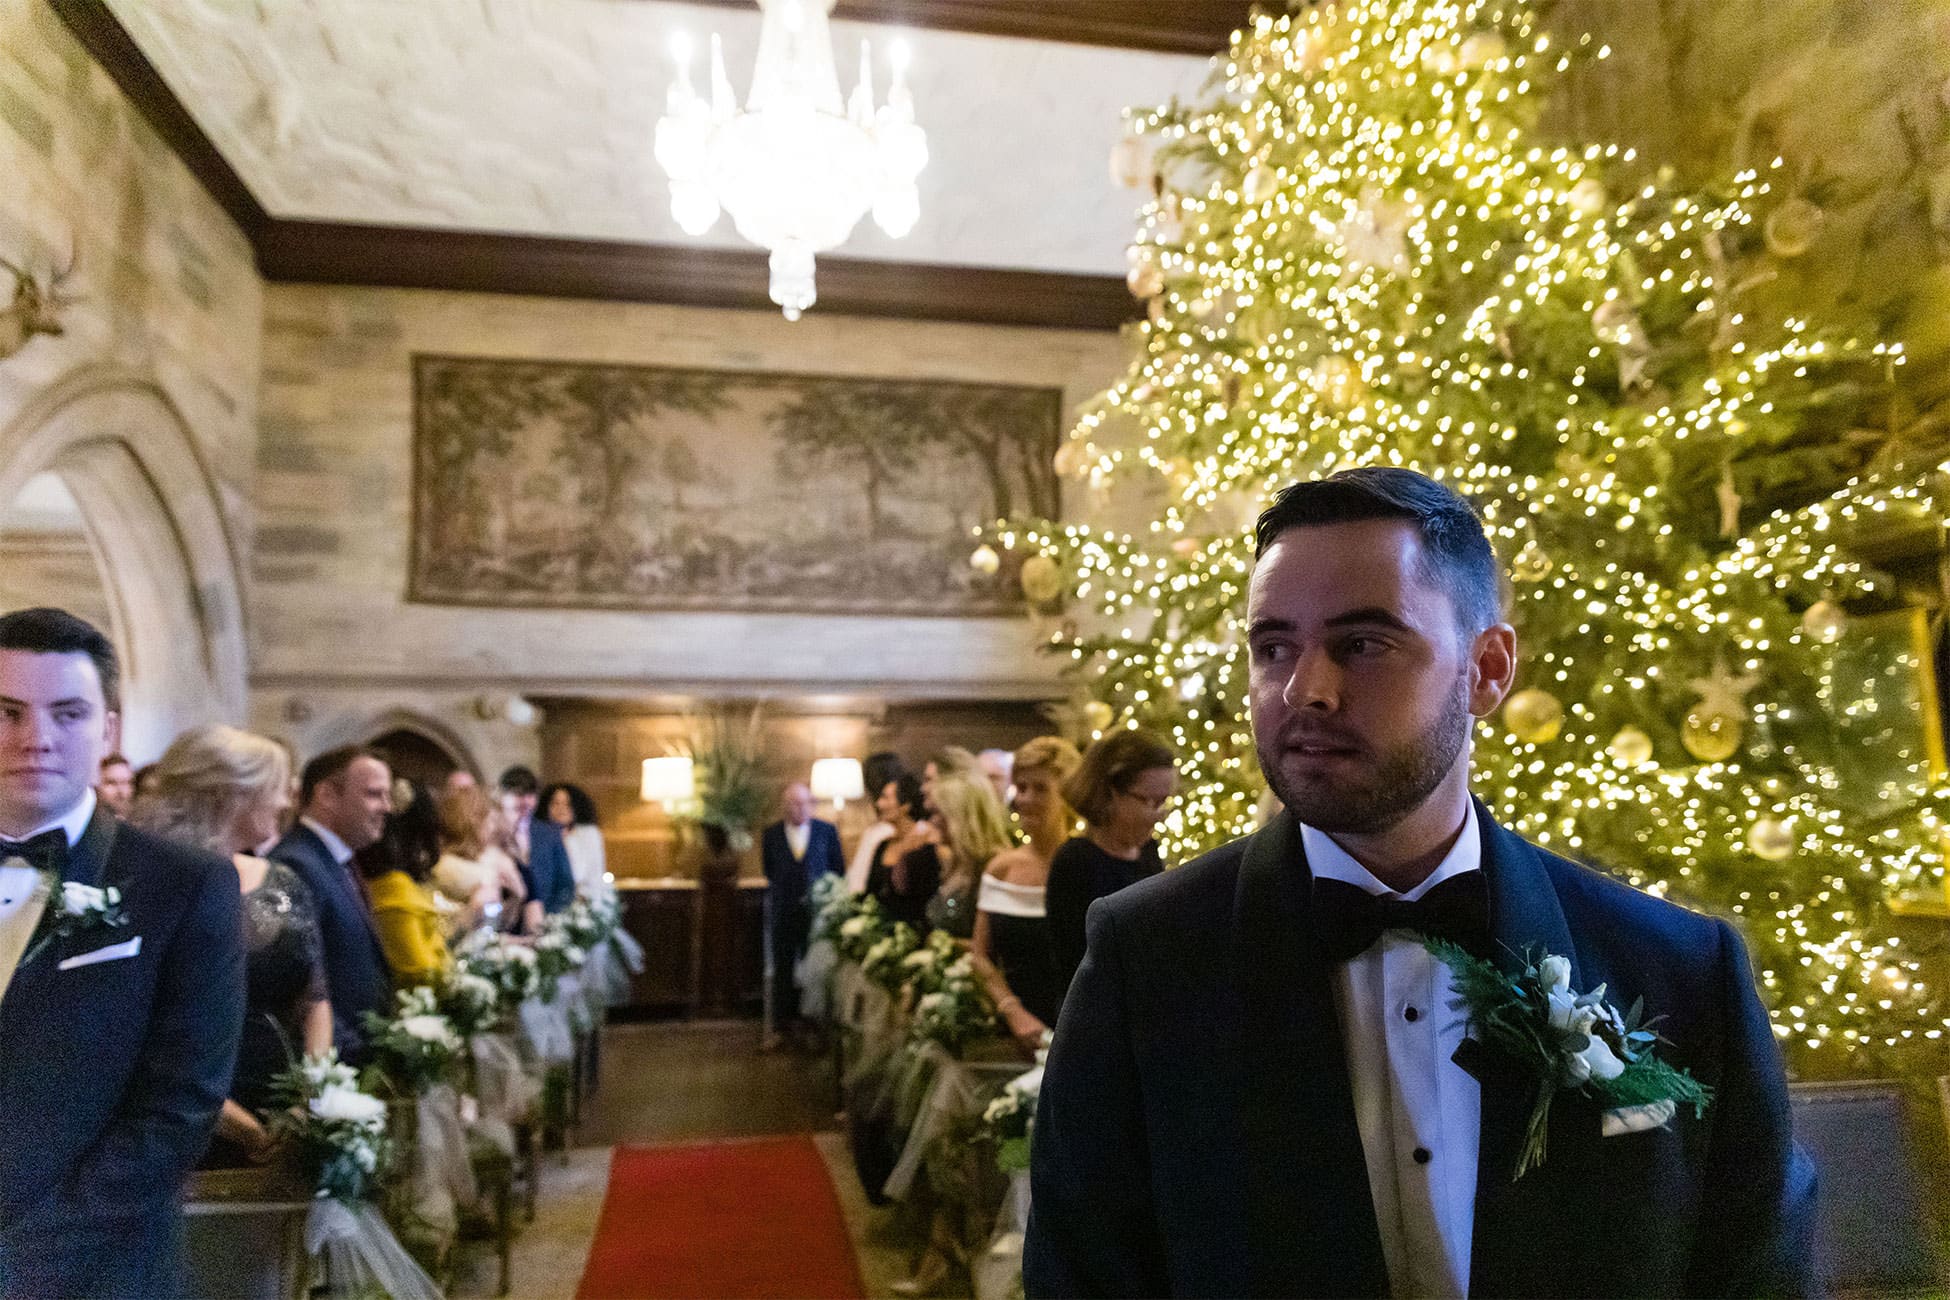 Waterford Castle Christmas Wedding Ceremony Photography Katie Kav